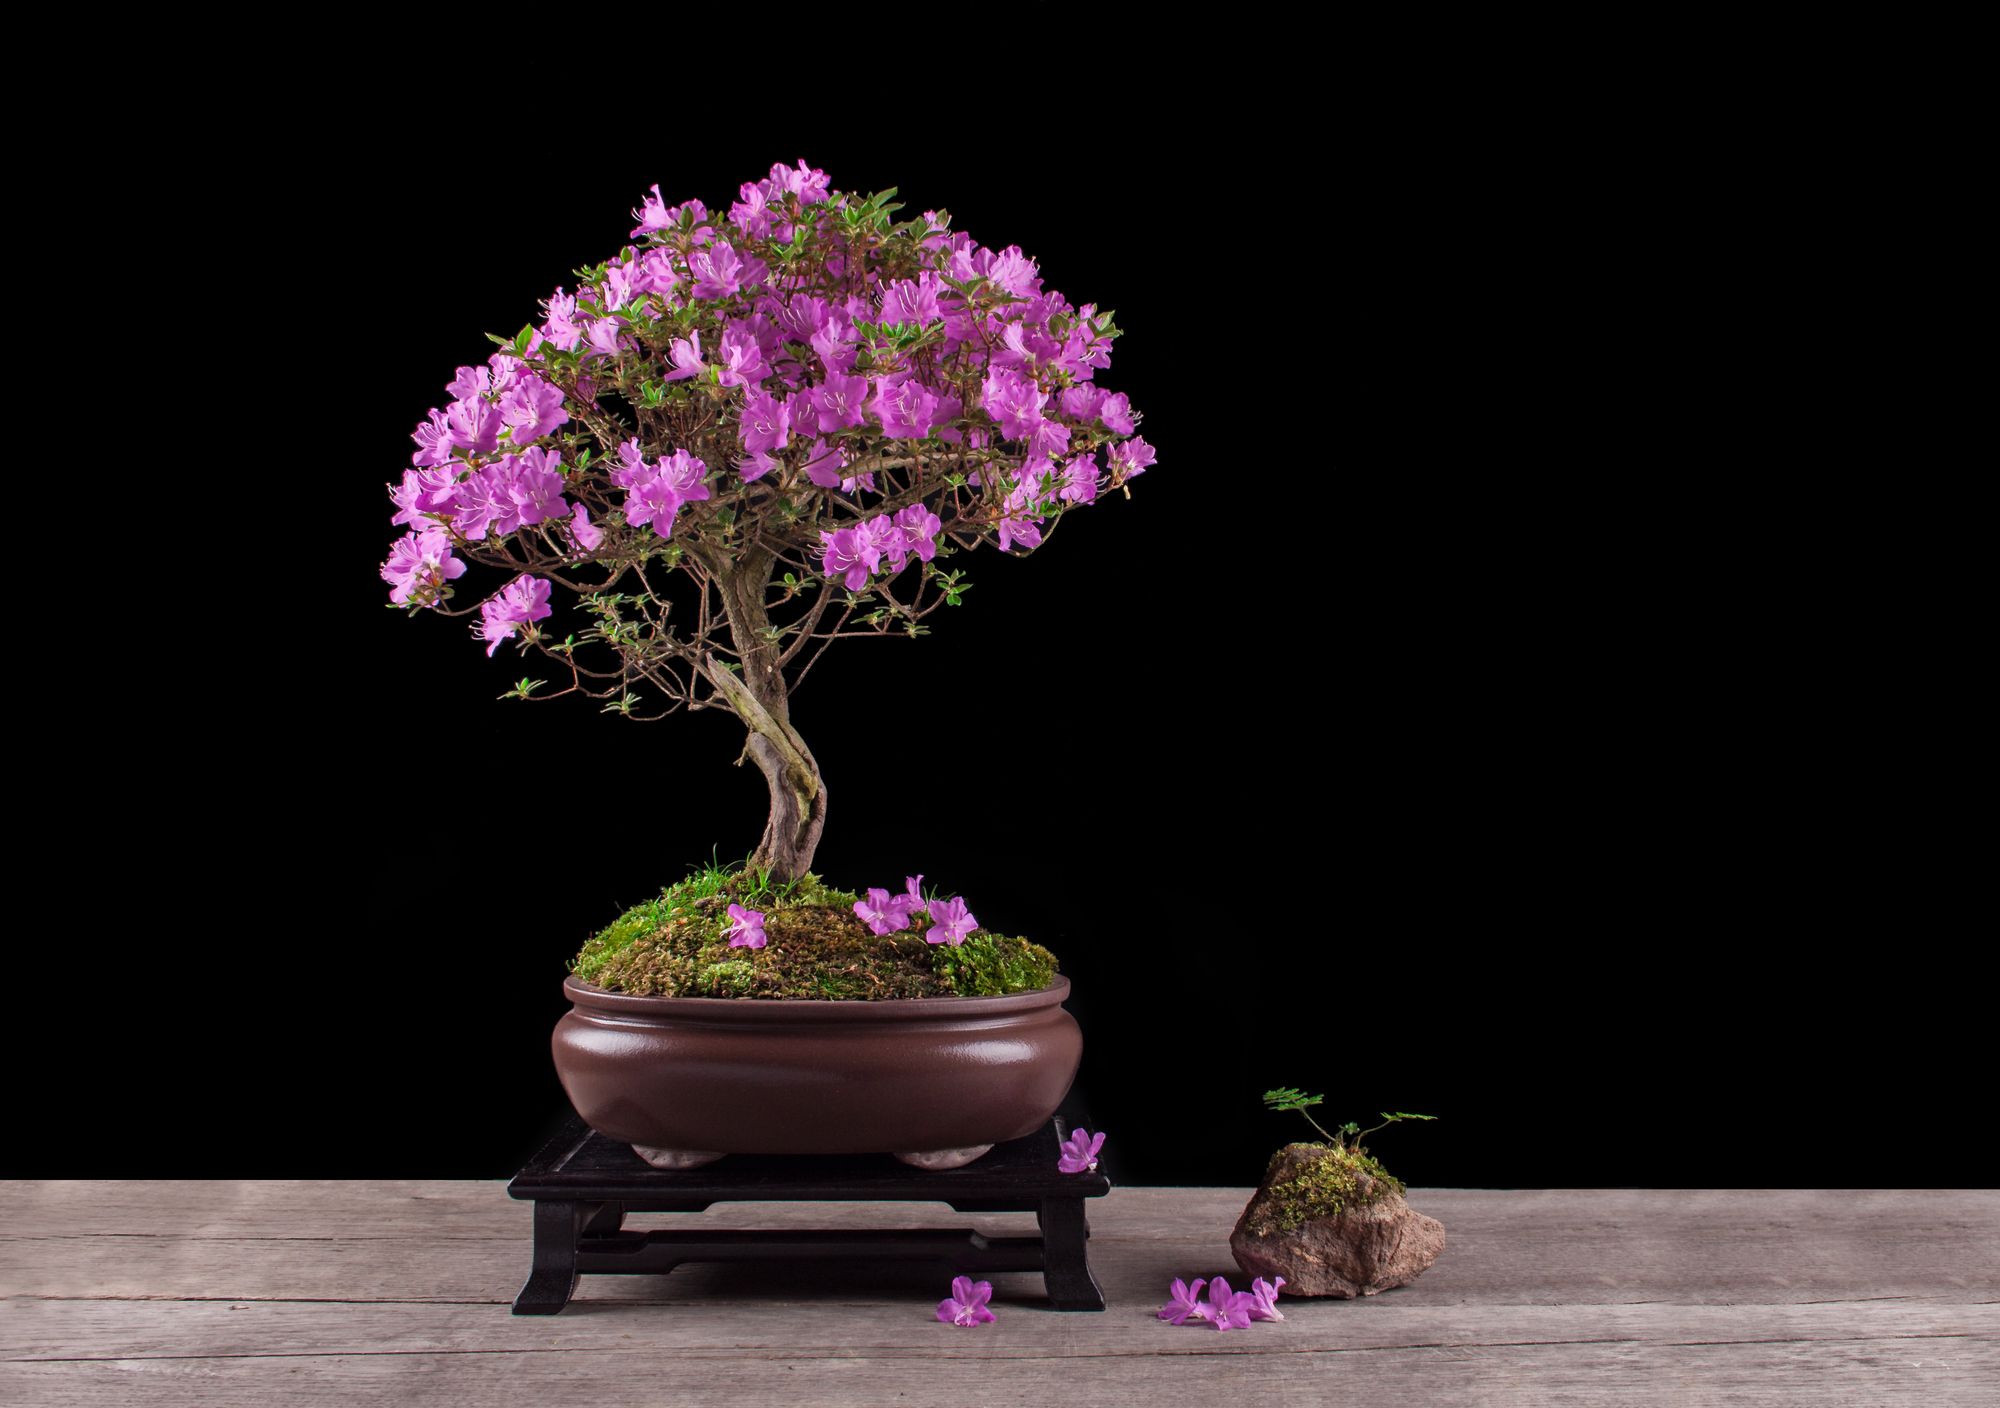 Purple flowering bonsai tree planted in a rounded pot and a rock on the pavement beside it